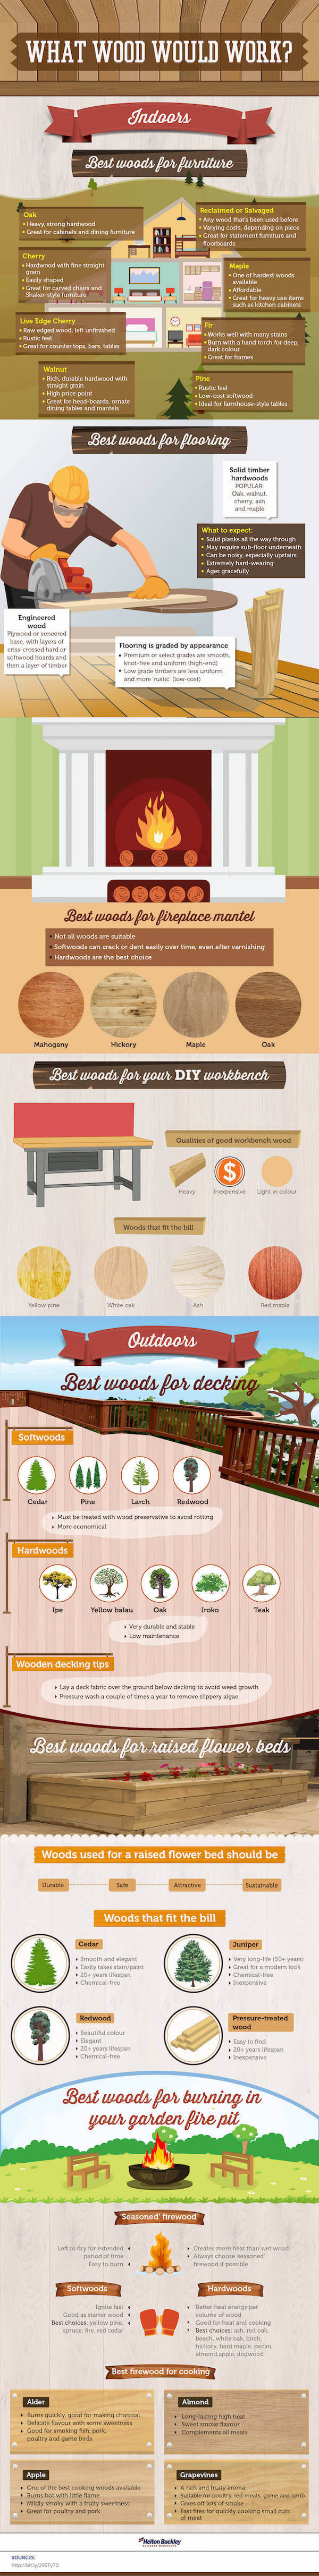 What Wood Would Work infographic